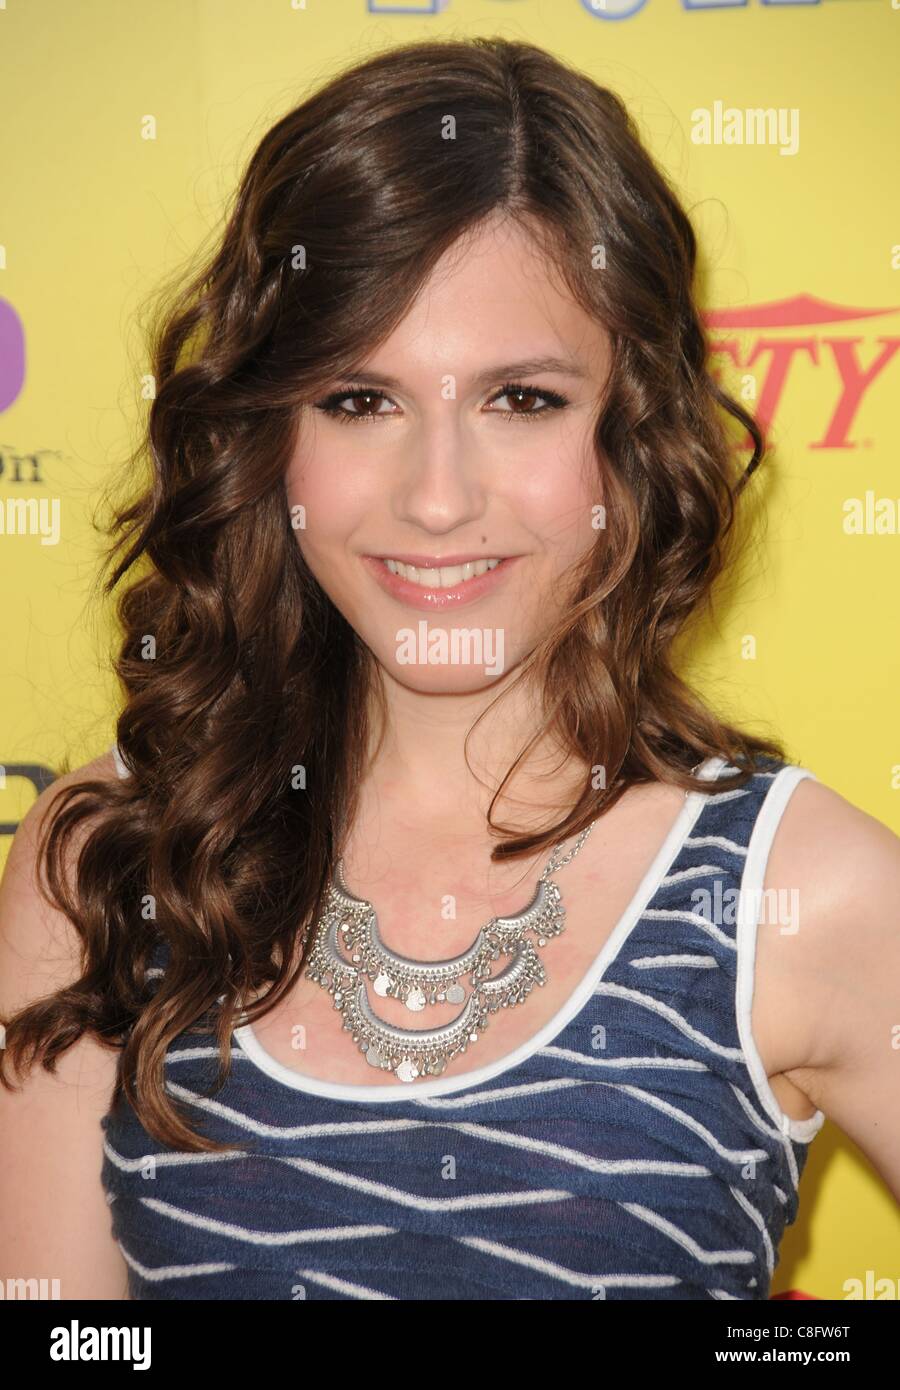 Erin Sanders at arrivals for Variety's 5th Annual Power of Youth Event, Paramount Studios, Los Angeles, CA October 22, 2011. Photo By: Dee Cercone/Everett Collection Stock Photo